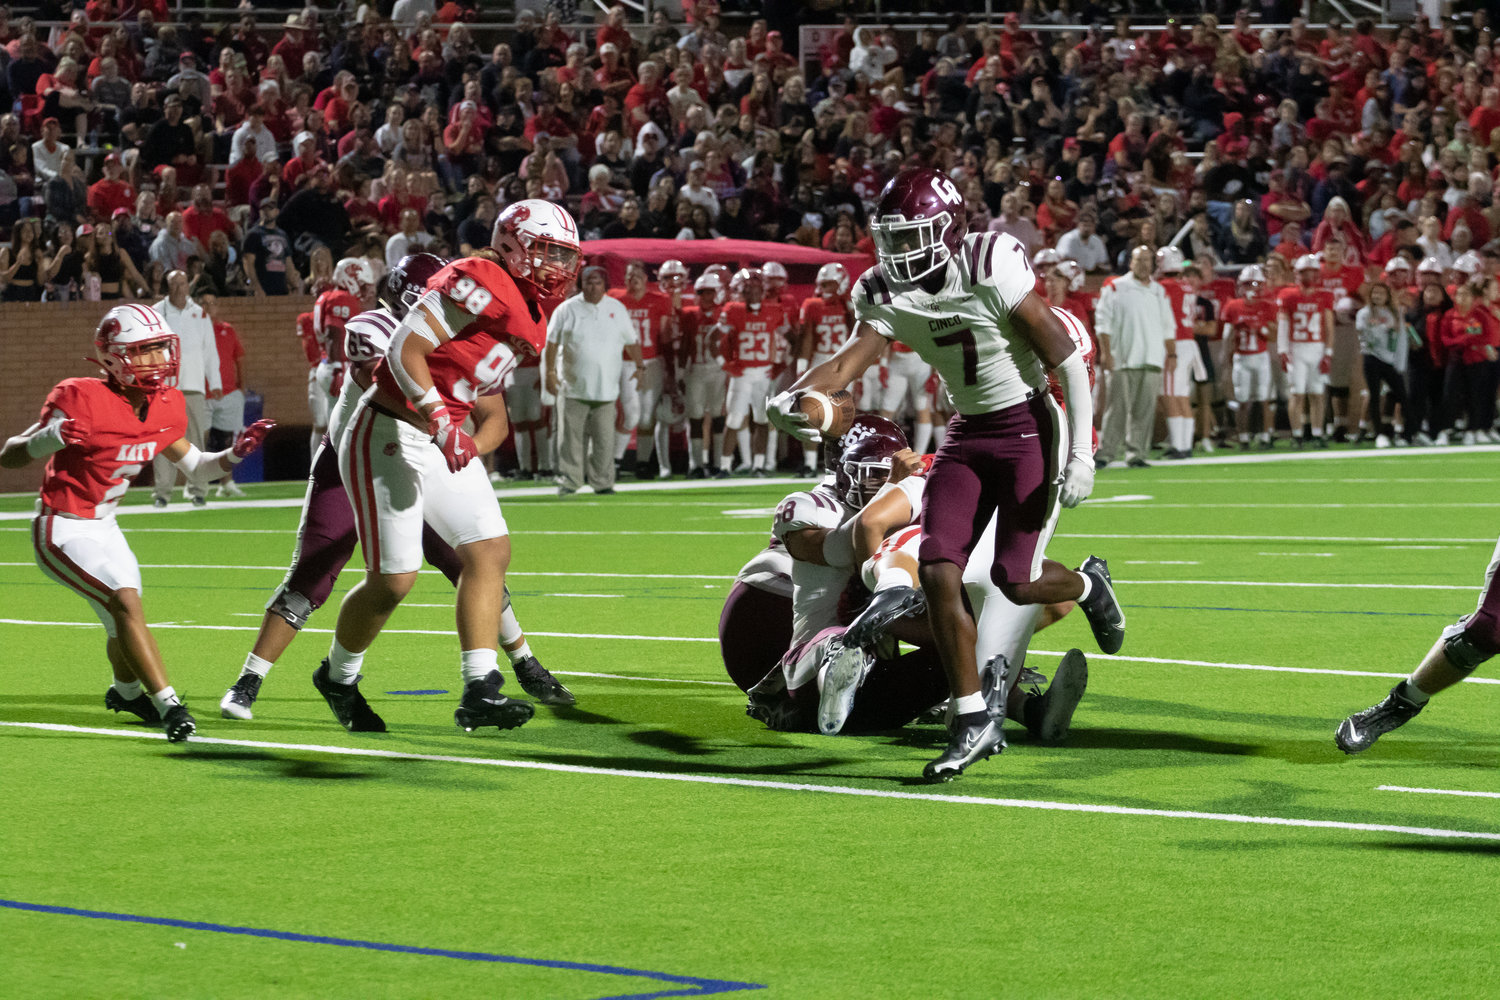 Cinco Ranch's Sam McKnight runs in a touchdown during Friday's game between Katy and Cinco Ranch at Rhodes Stadium.